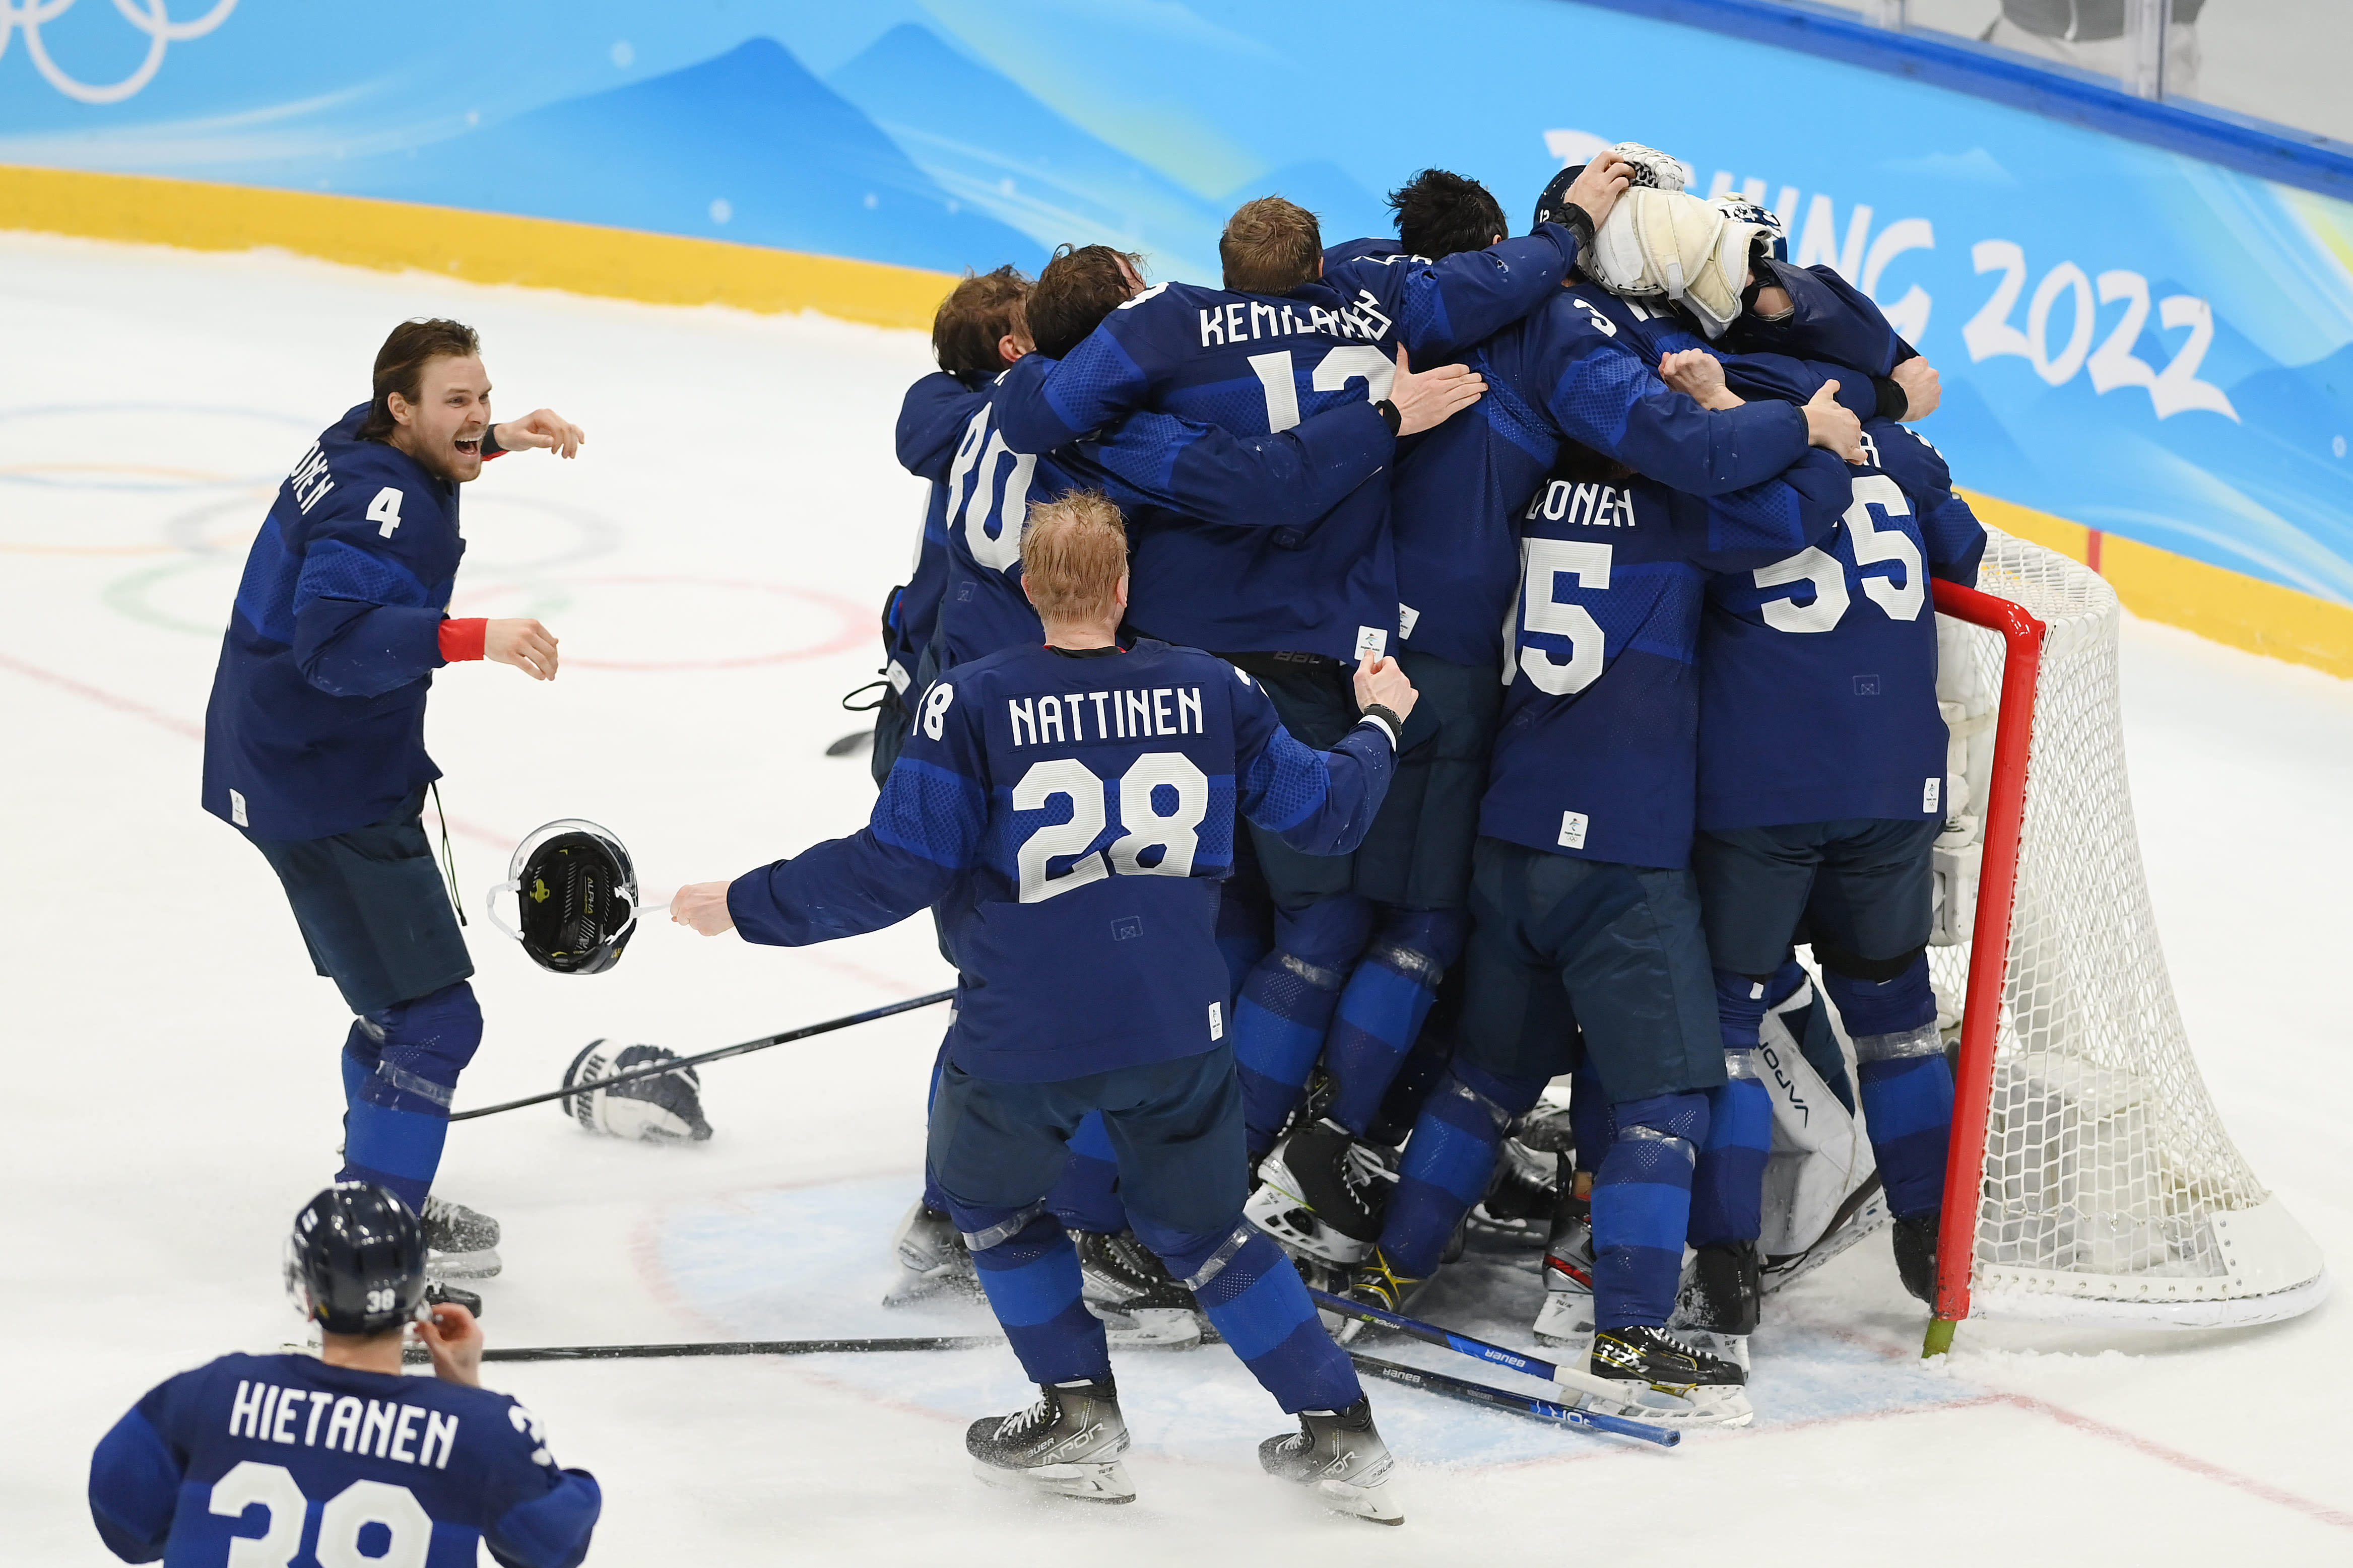 IIHF Ice Hockey World Championship 2023 Preview, schedule, stars involved, how to watch live